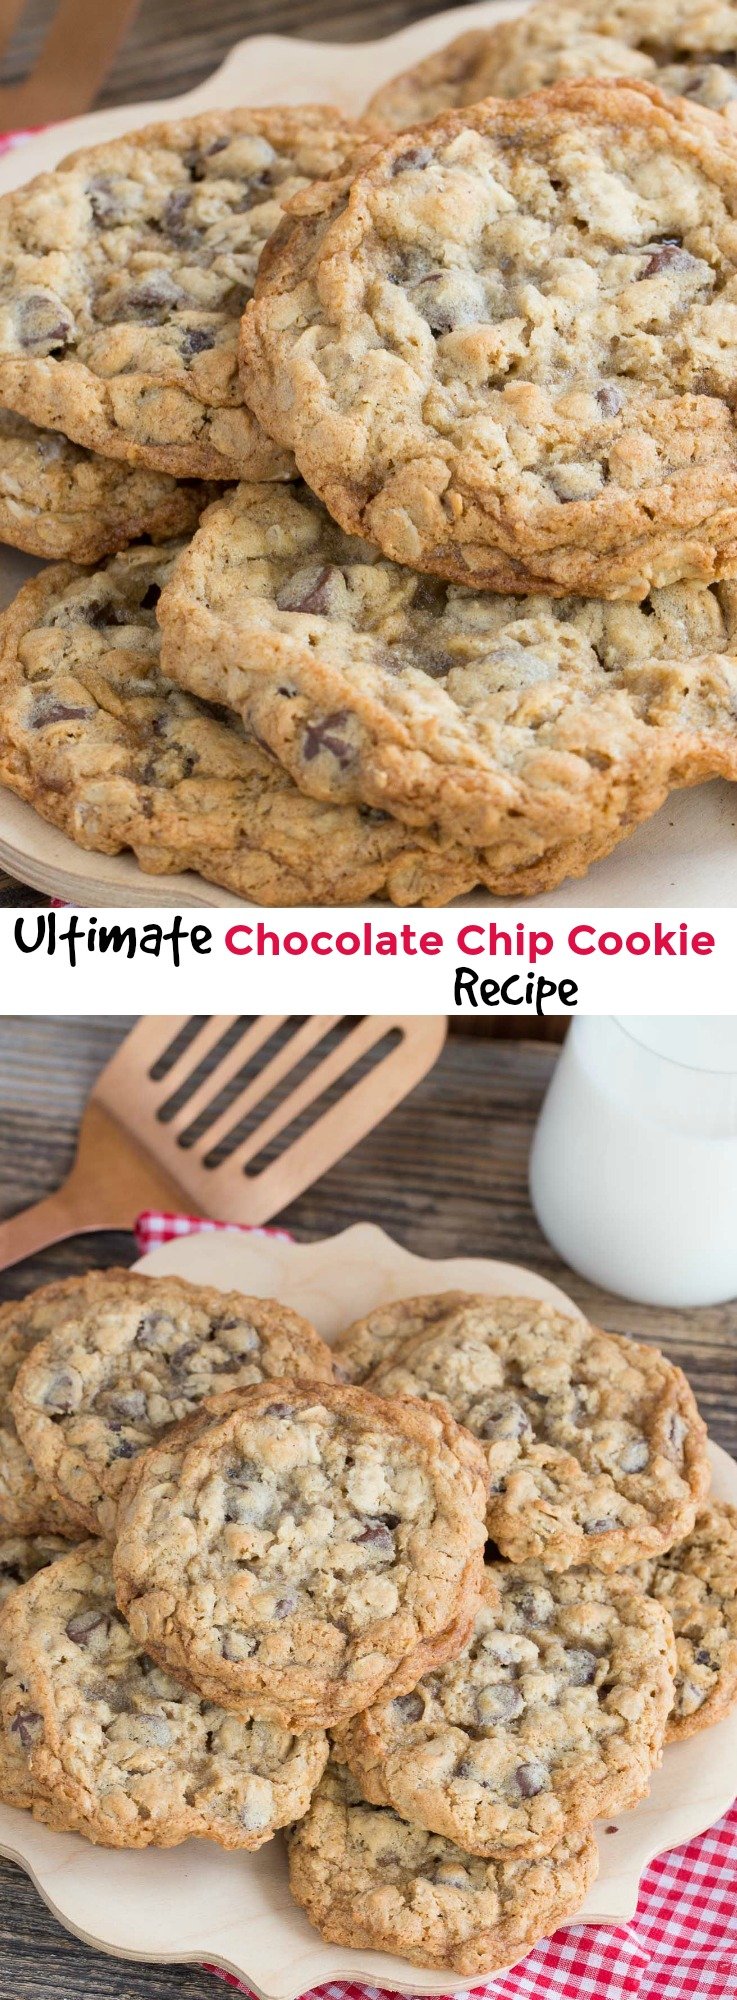 This recipe for Ultimate Chocolate Chip Cookies makes a cookie that is crisp on the outside and the oatmeal give them a chewy inside.  via @artandthekitch